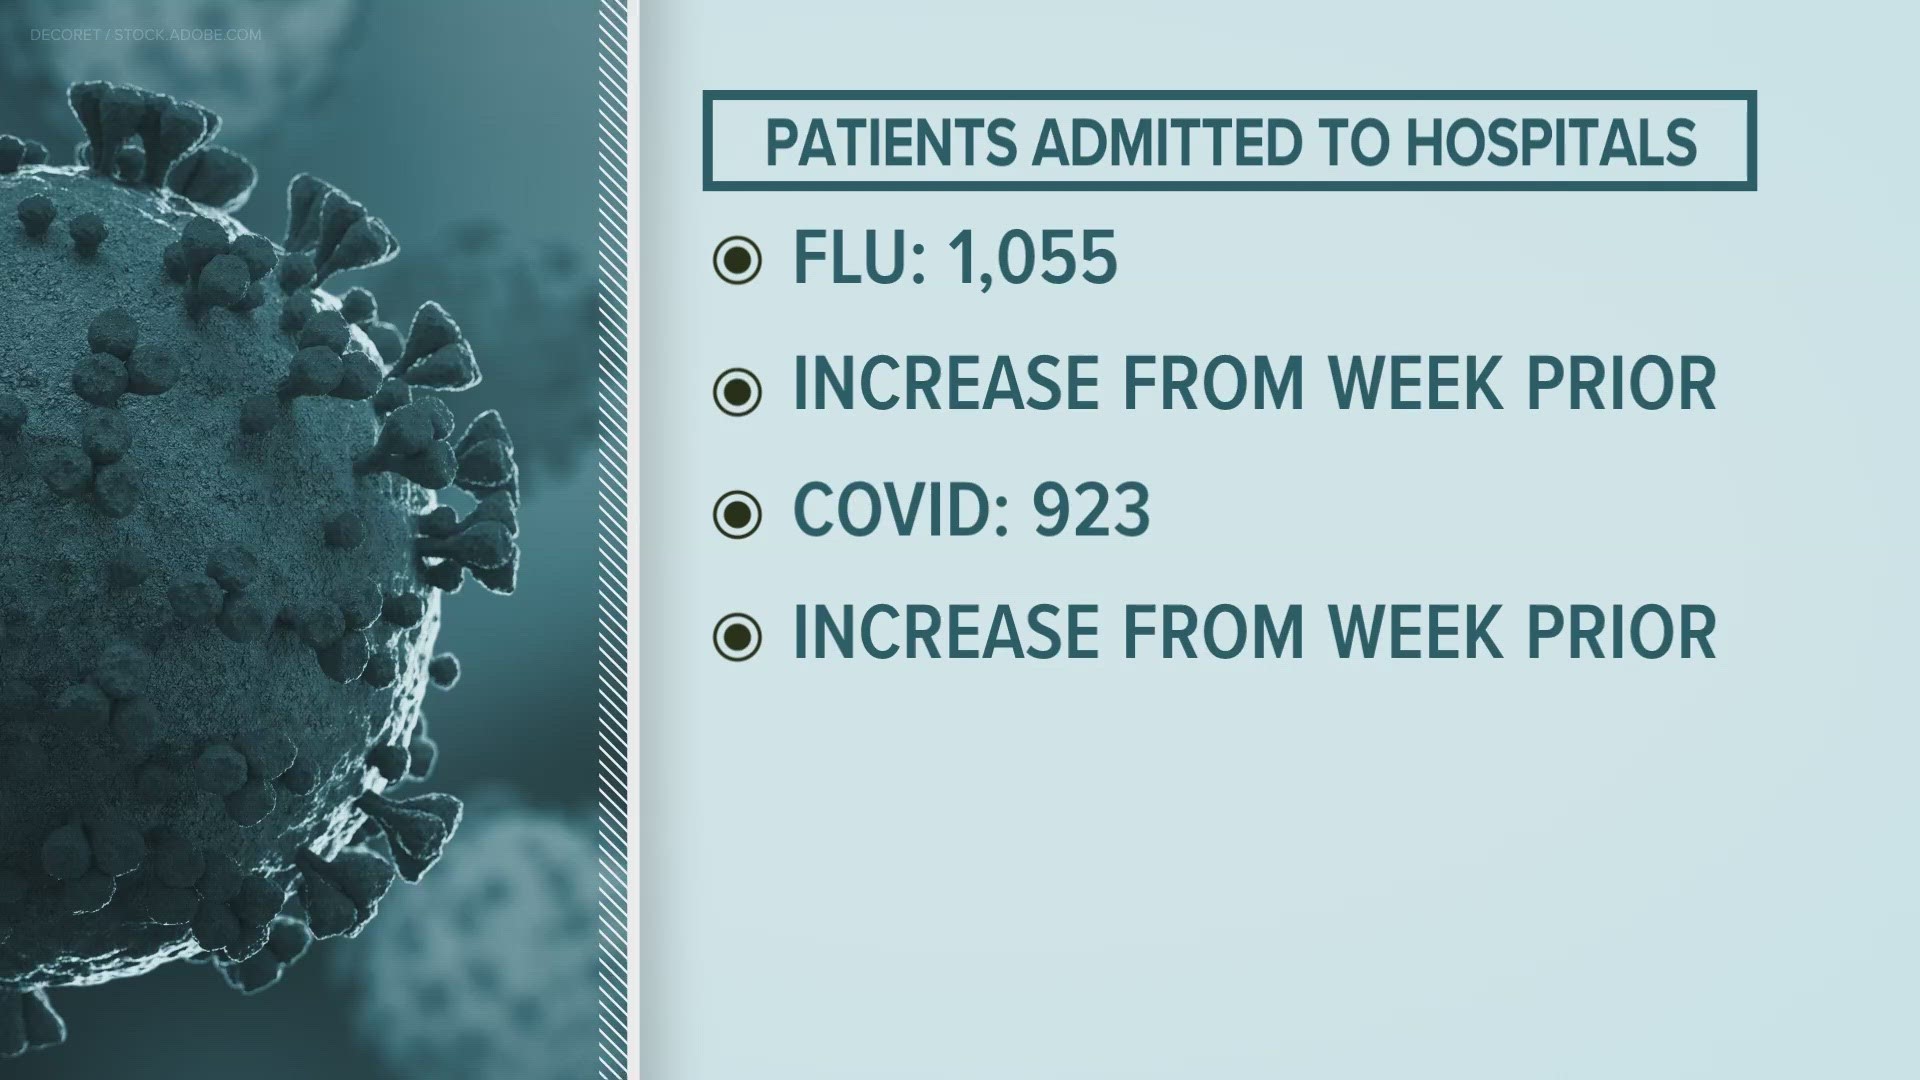 NCDHHS reports more than 1,000 flu patients and 900 COVID patients admitted to hospitals in the last week of December.